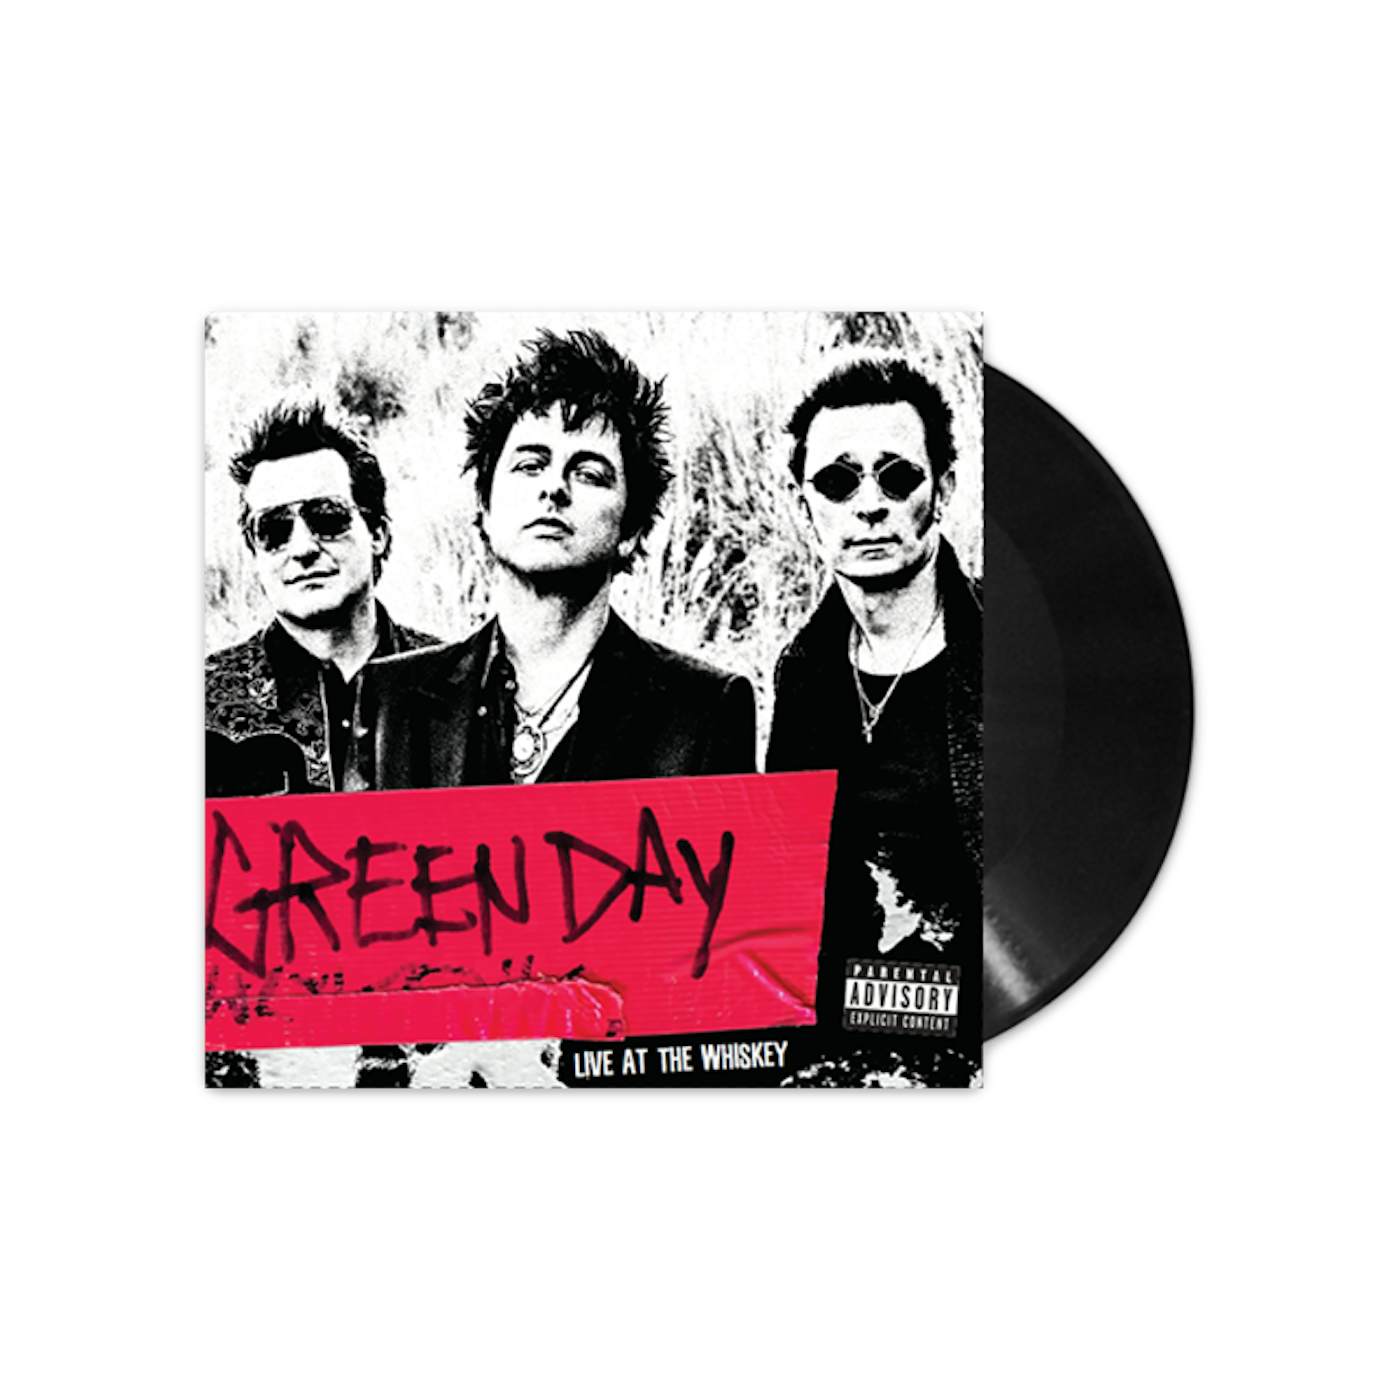 Green Day Live at the Whisky 7”